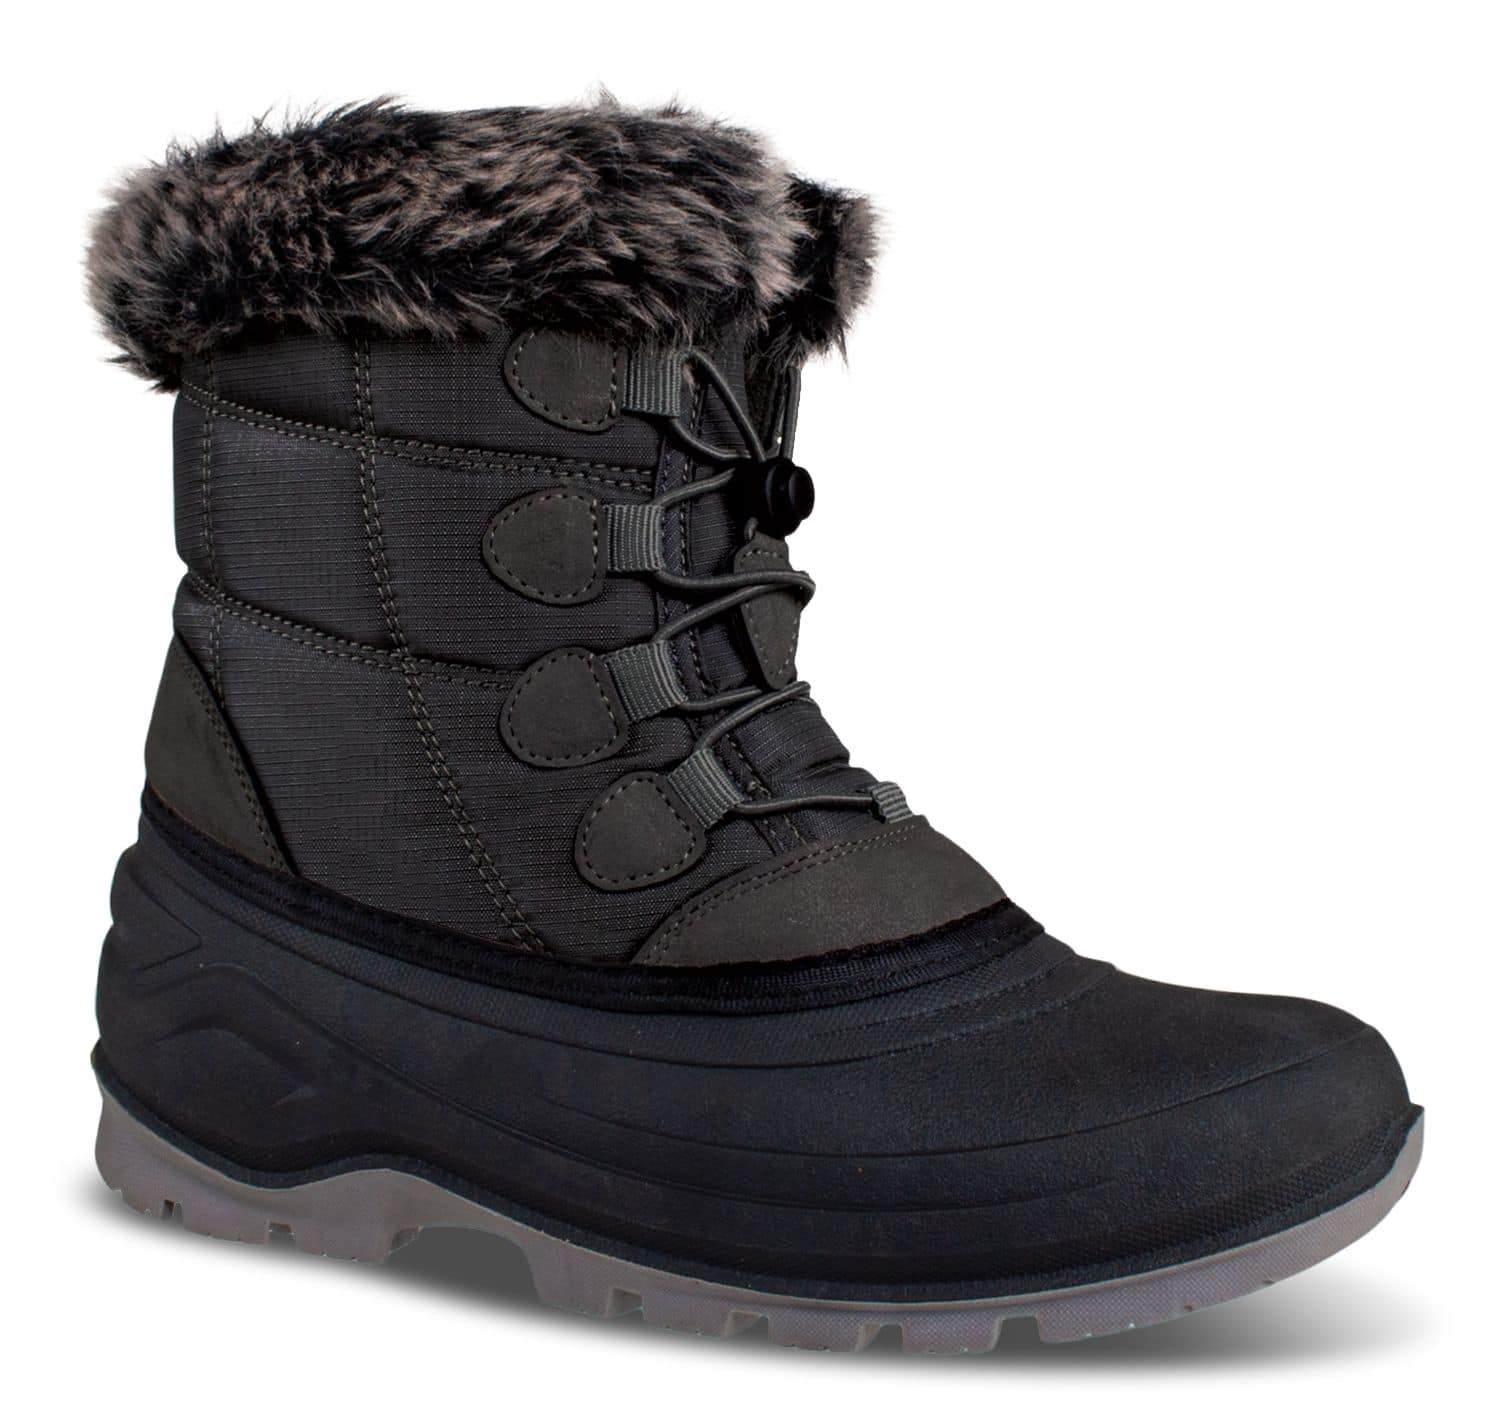 Outbound Women's Faux-Fur Insulated Winter Boots, Black